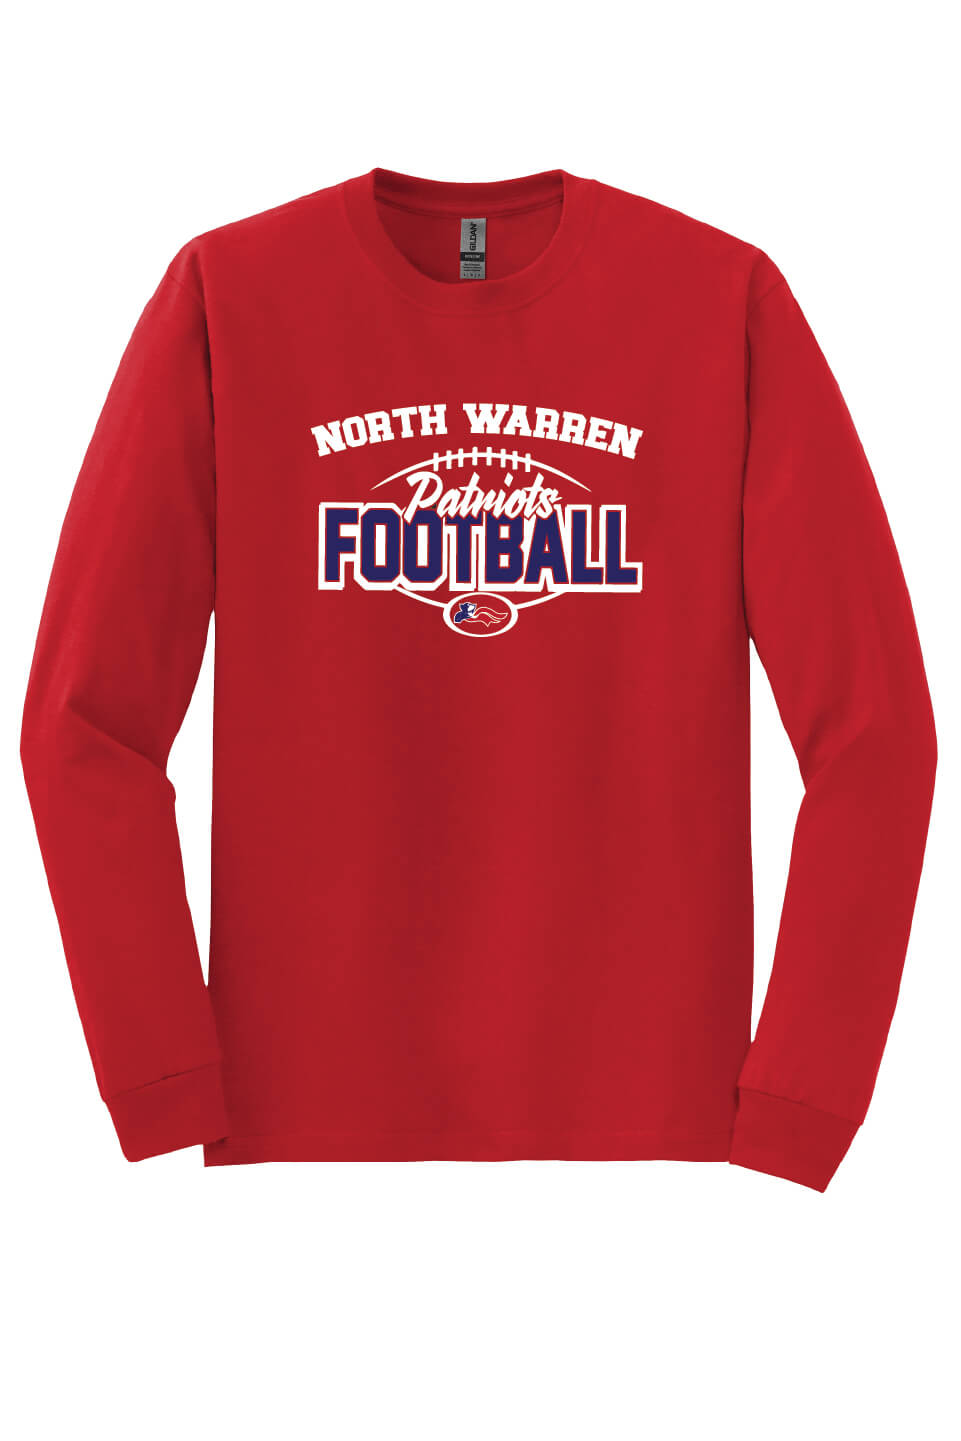 NW Patriots Football Long Sleeve T-shirts (Youth) red